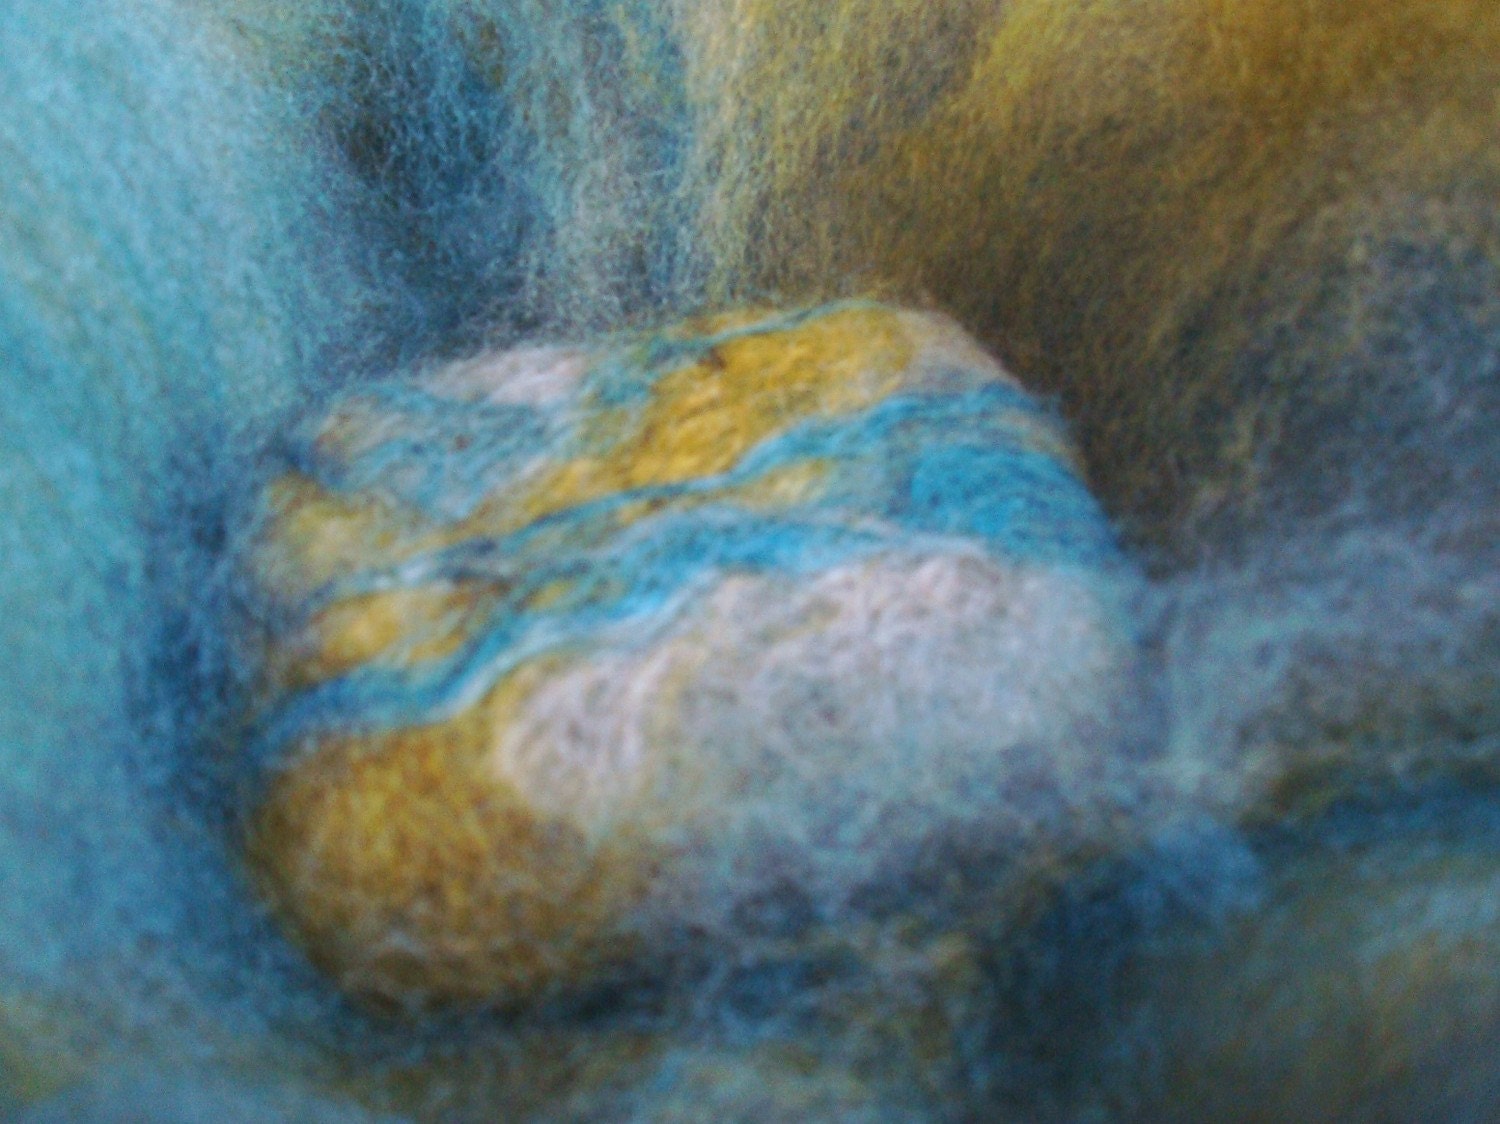 Felted Peppermint Hot Process Soap